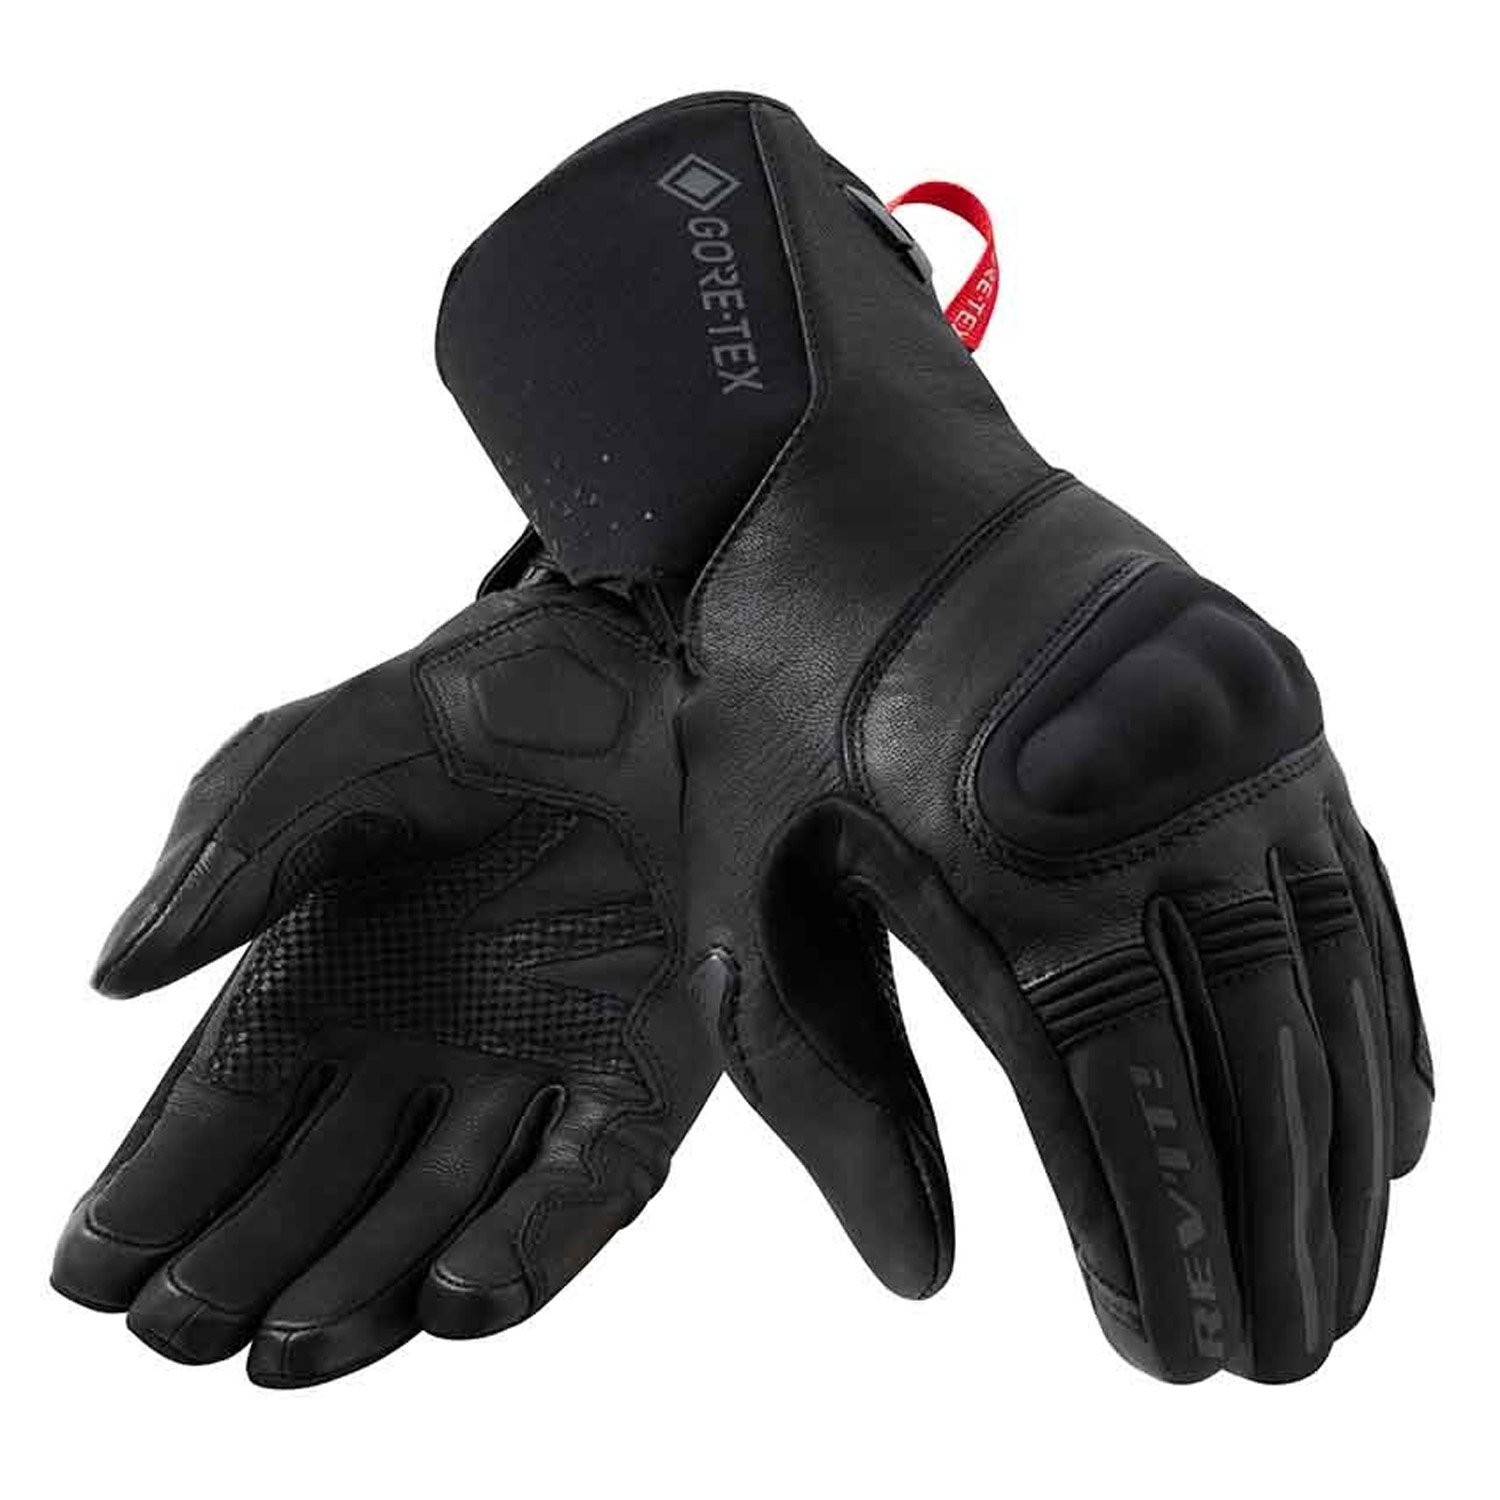 Image of REV'IT! Lacus GTX Gloves Black Size S ID 8700001361323